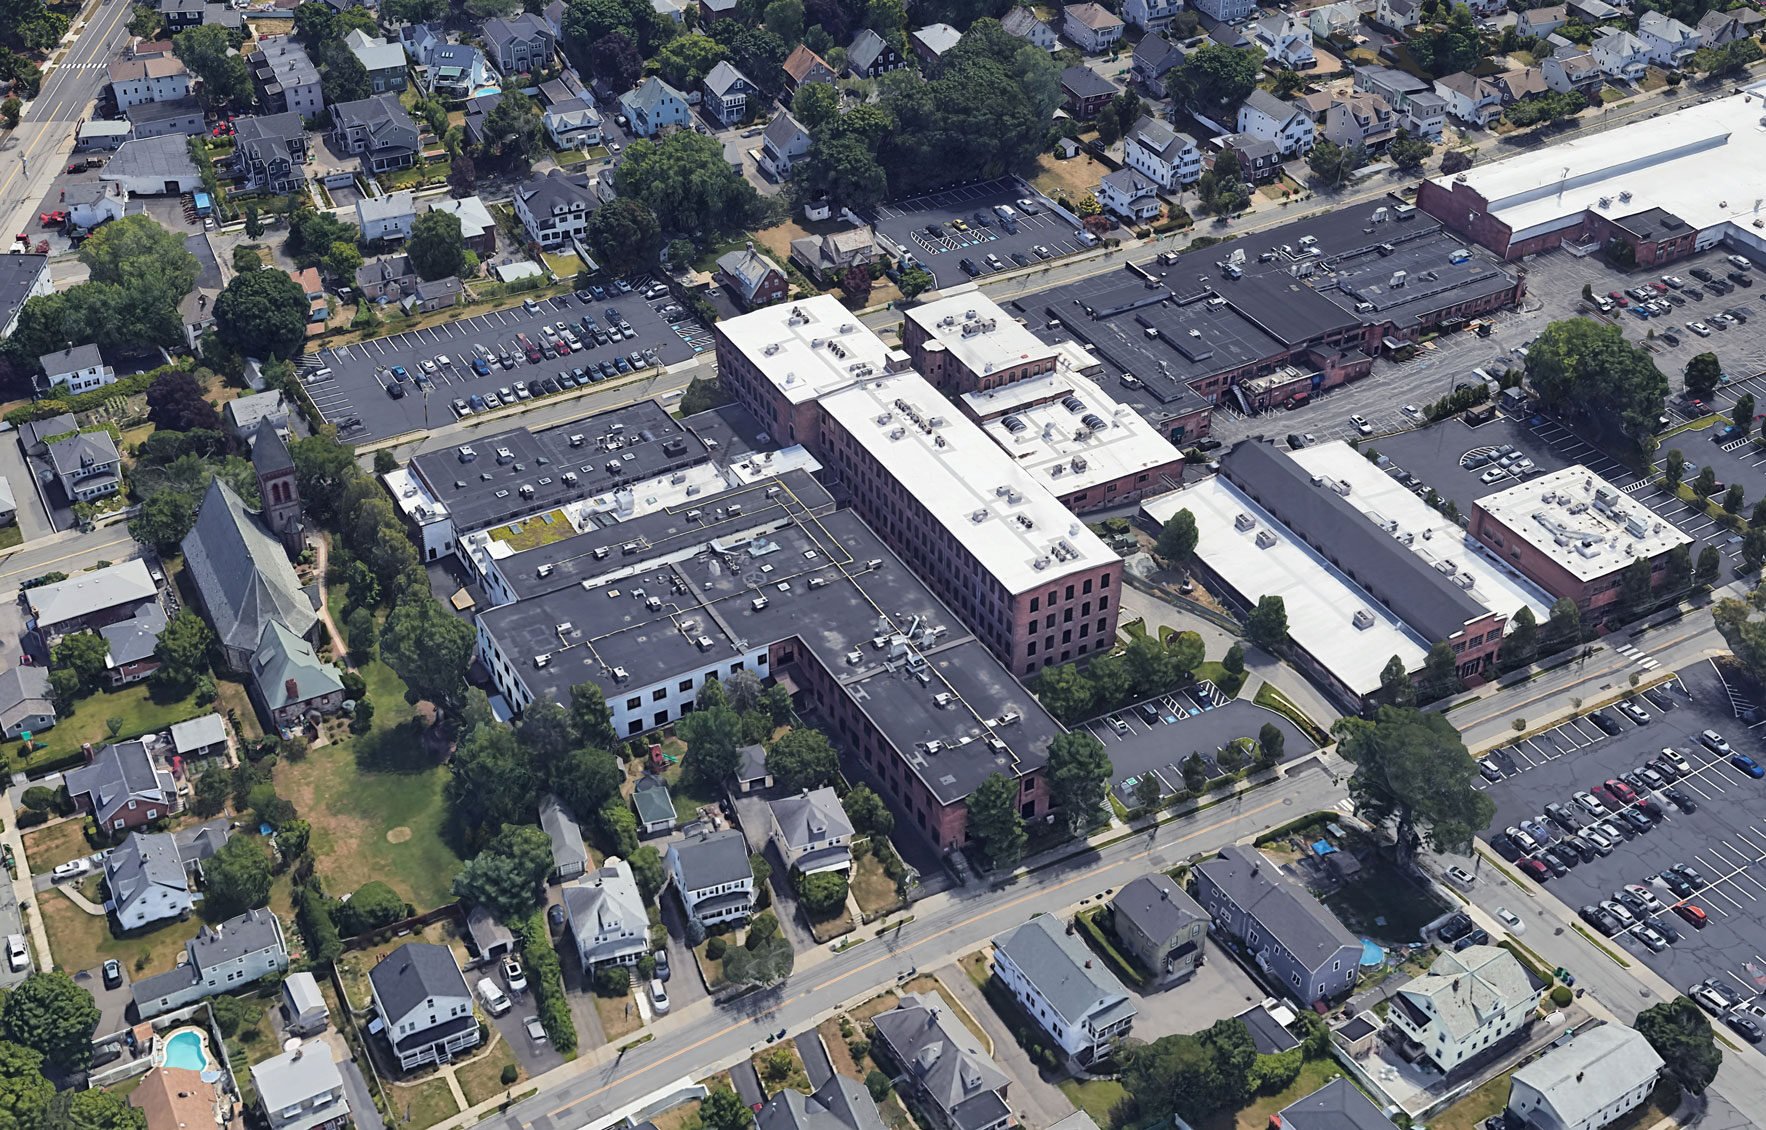 Automata Technologies Expands into North American Market with Lease Agreement at 70 Bridge Street, Newton, MA